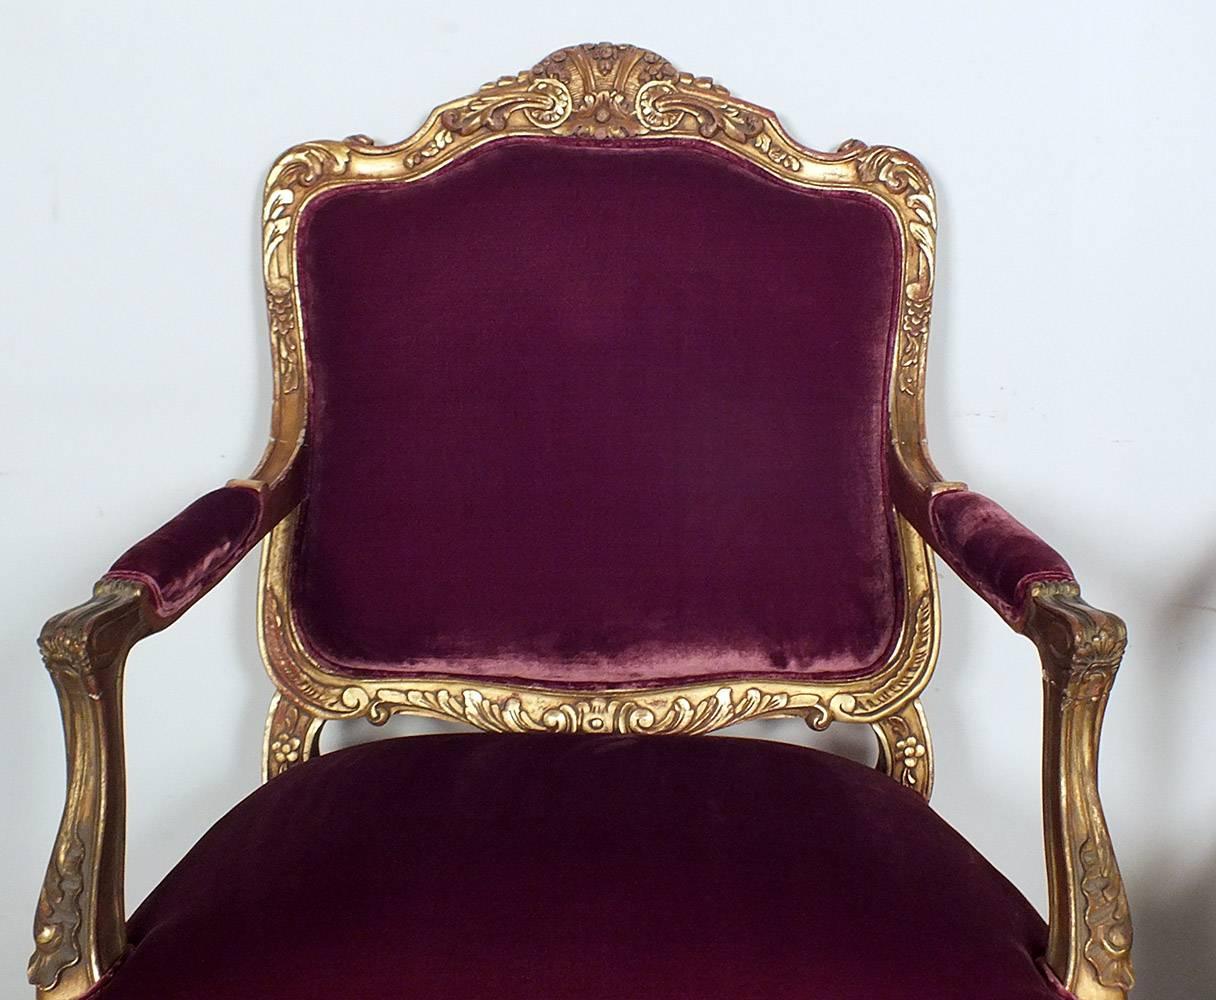 This elegant pair of French giltwood Louis XV Bergeres is made with solid wood frames. On the frames there are hand carved decorations throughout of leafs, sea shells, flowers and scrolls finished in a gold color. Both chairs have been recently